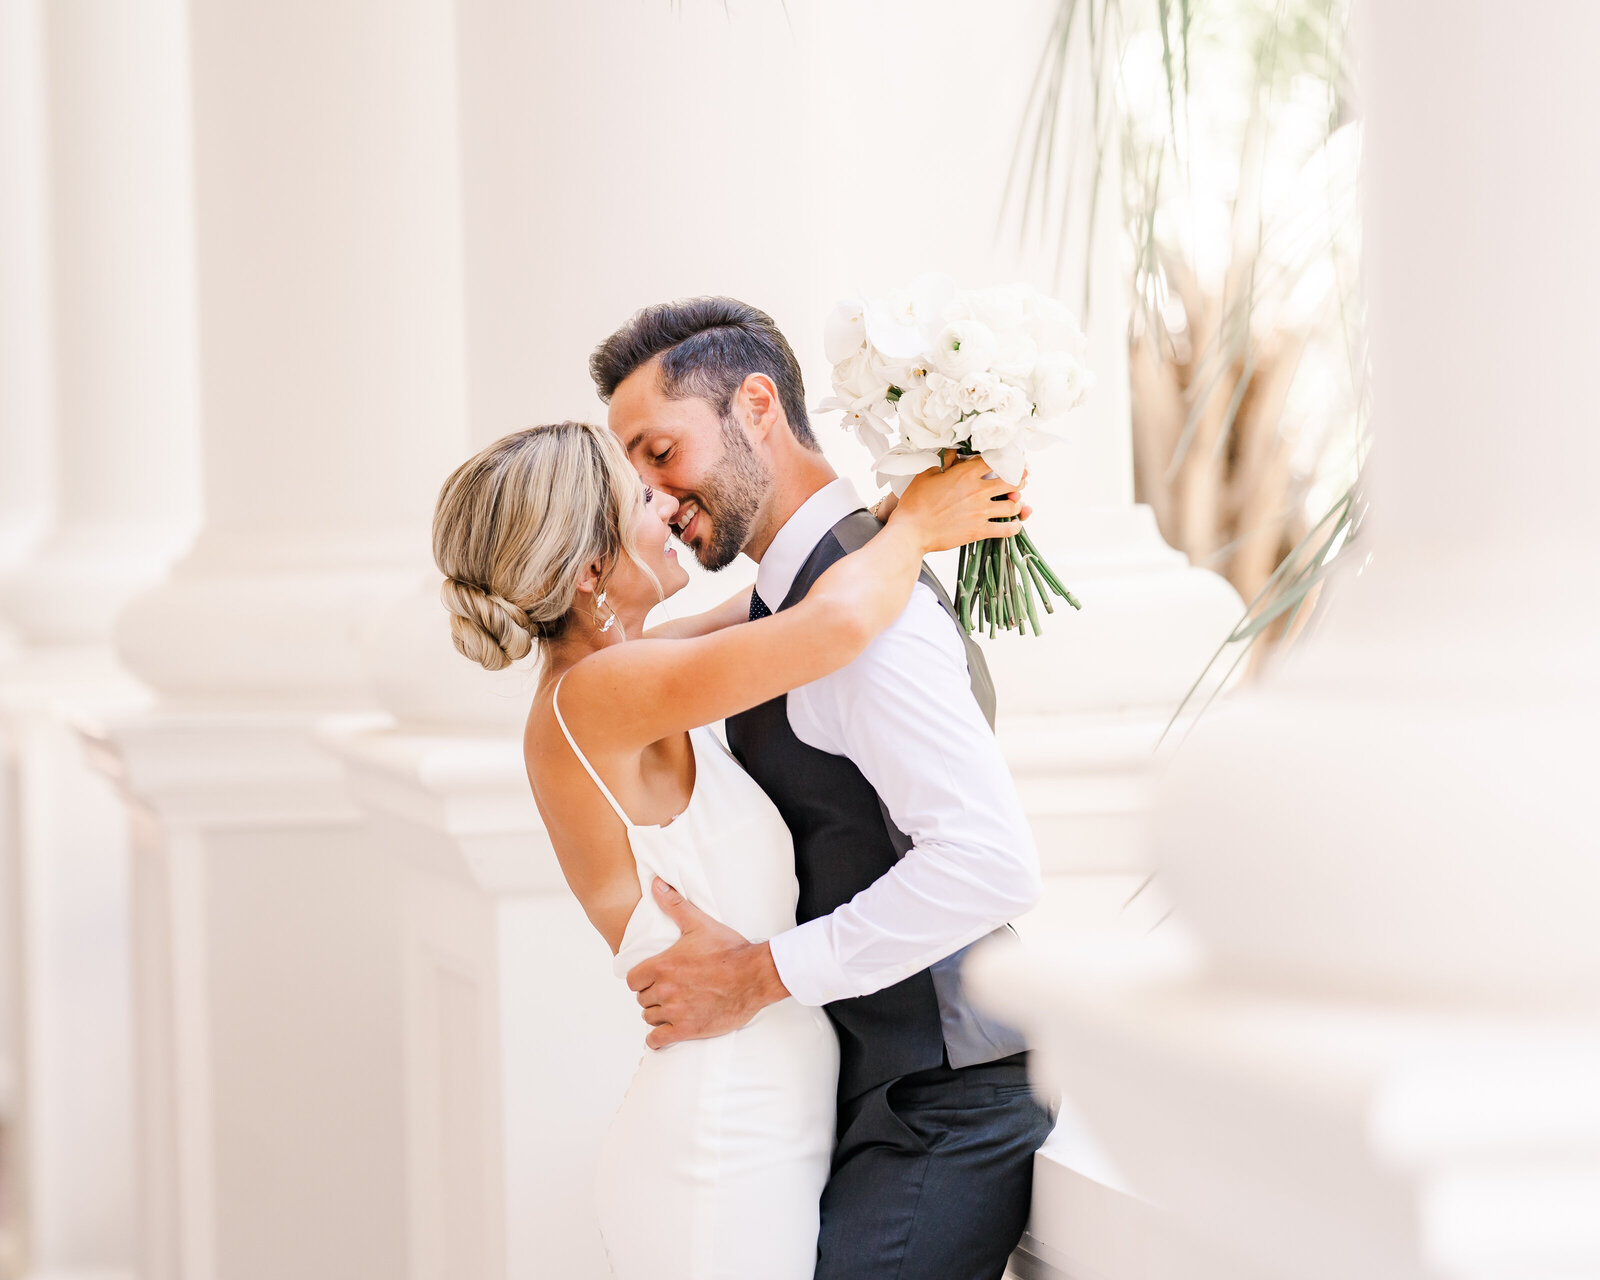 Bride and groom kiss each other next to white columns